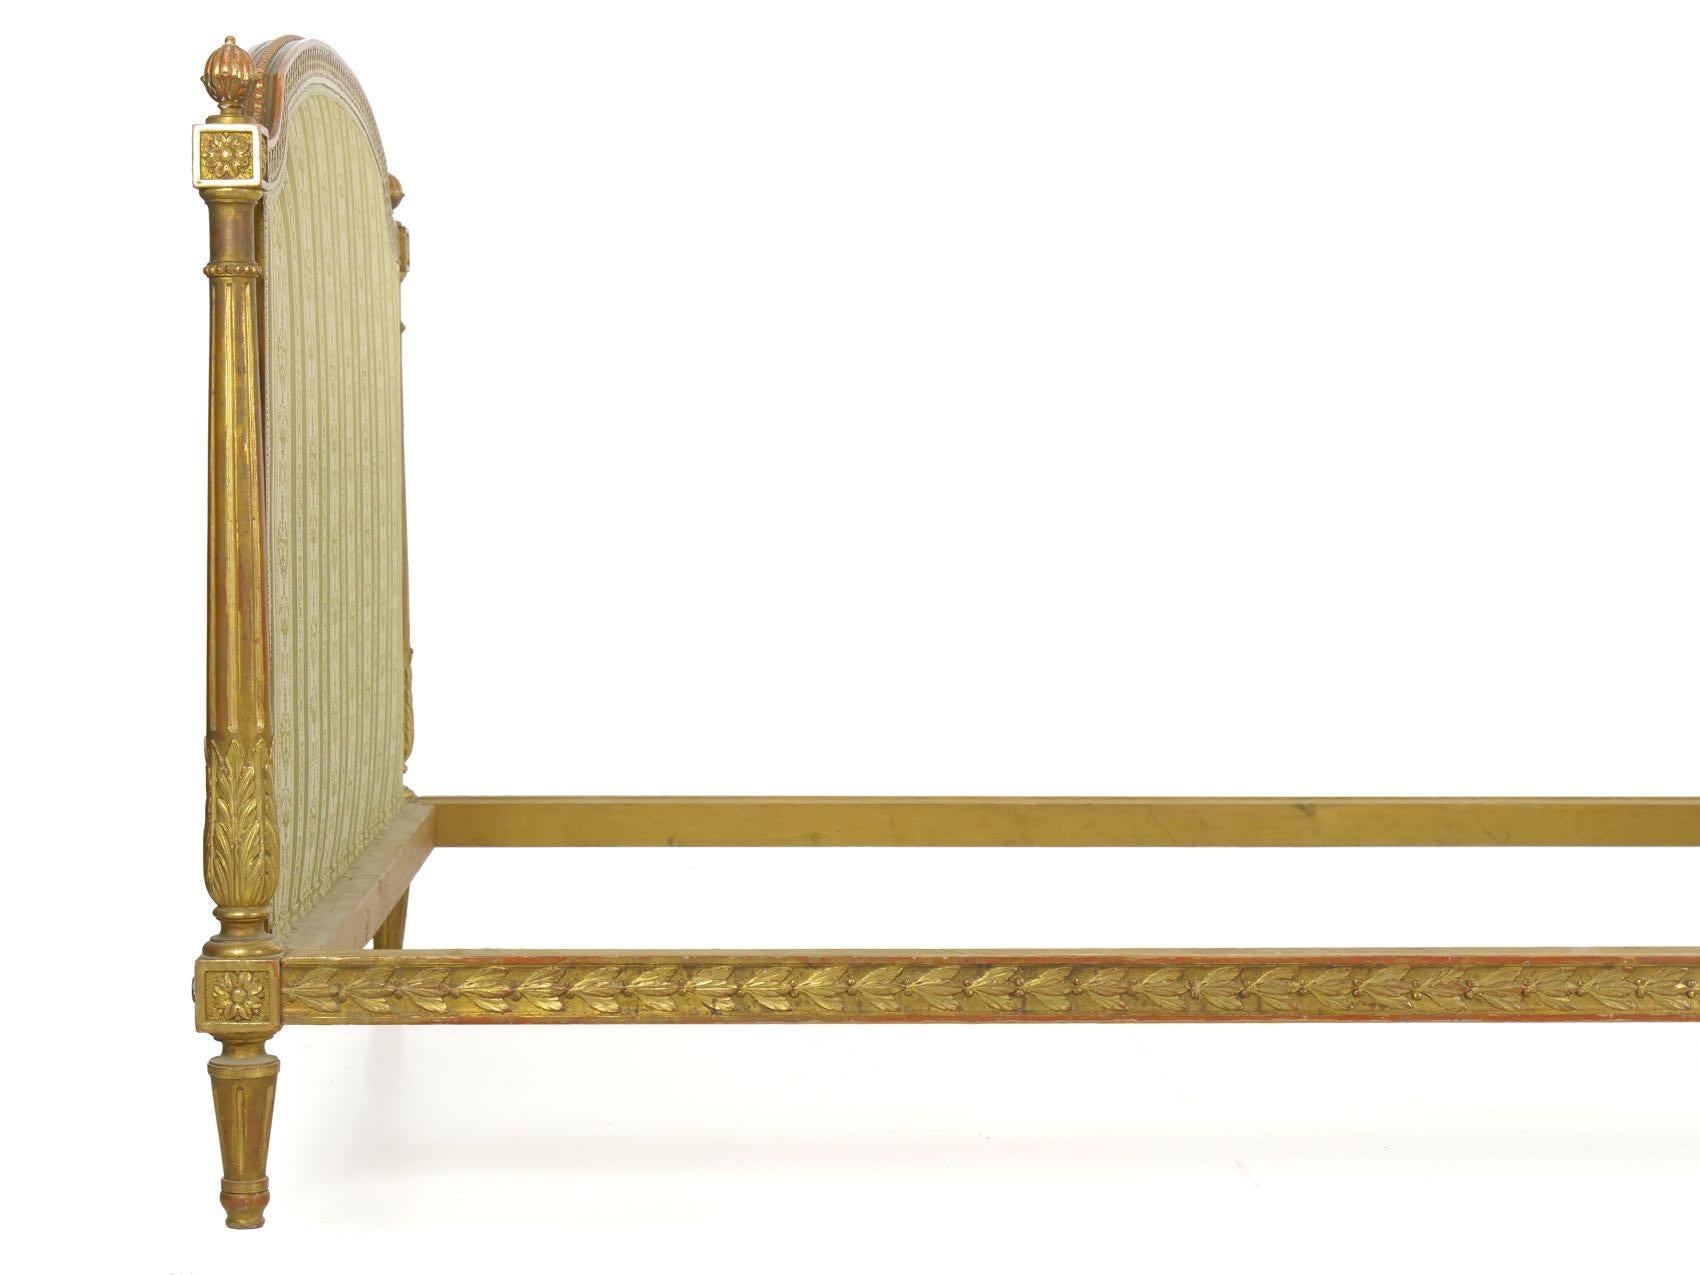 Hand-Carved French Louis XVI Style Carved Giltwood Bed Frame with Rails, circa 1900